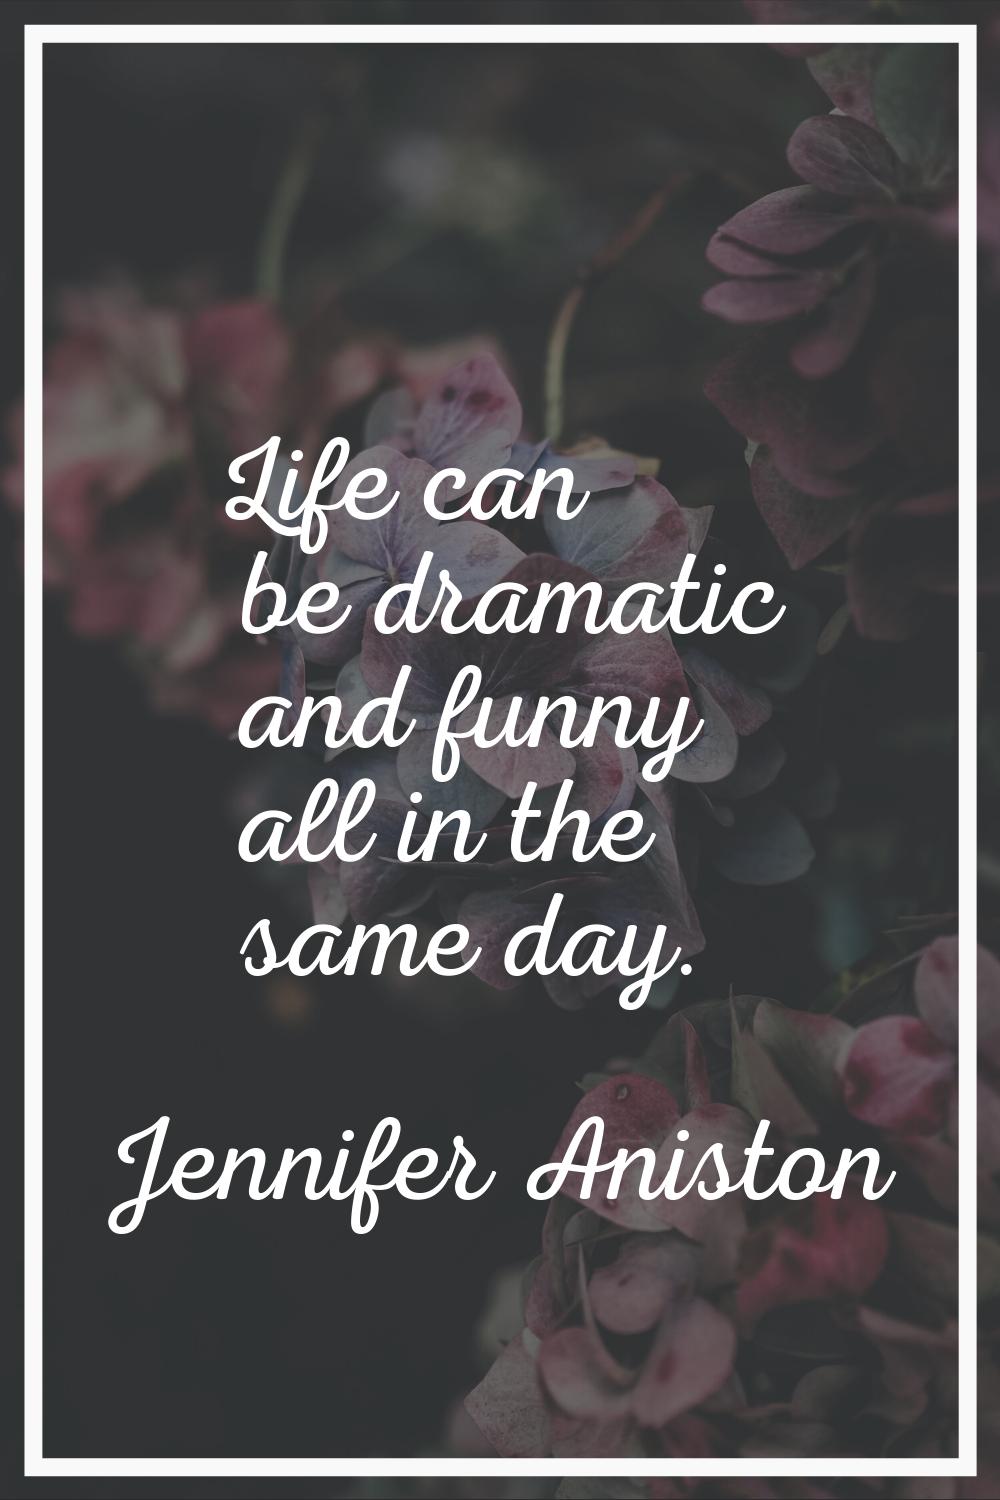 Life can be dramatic and funny all in the same day.